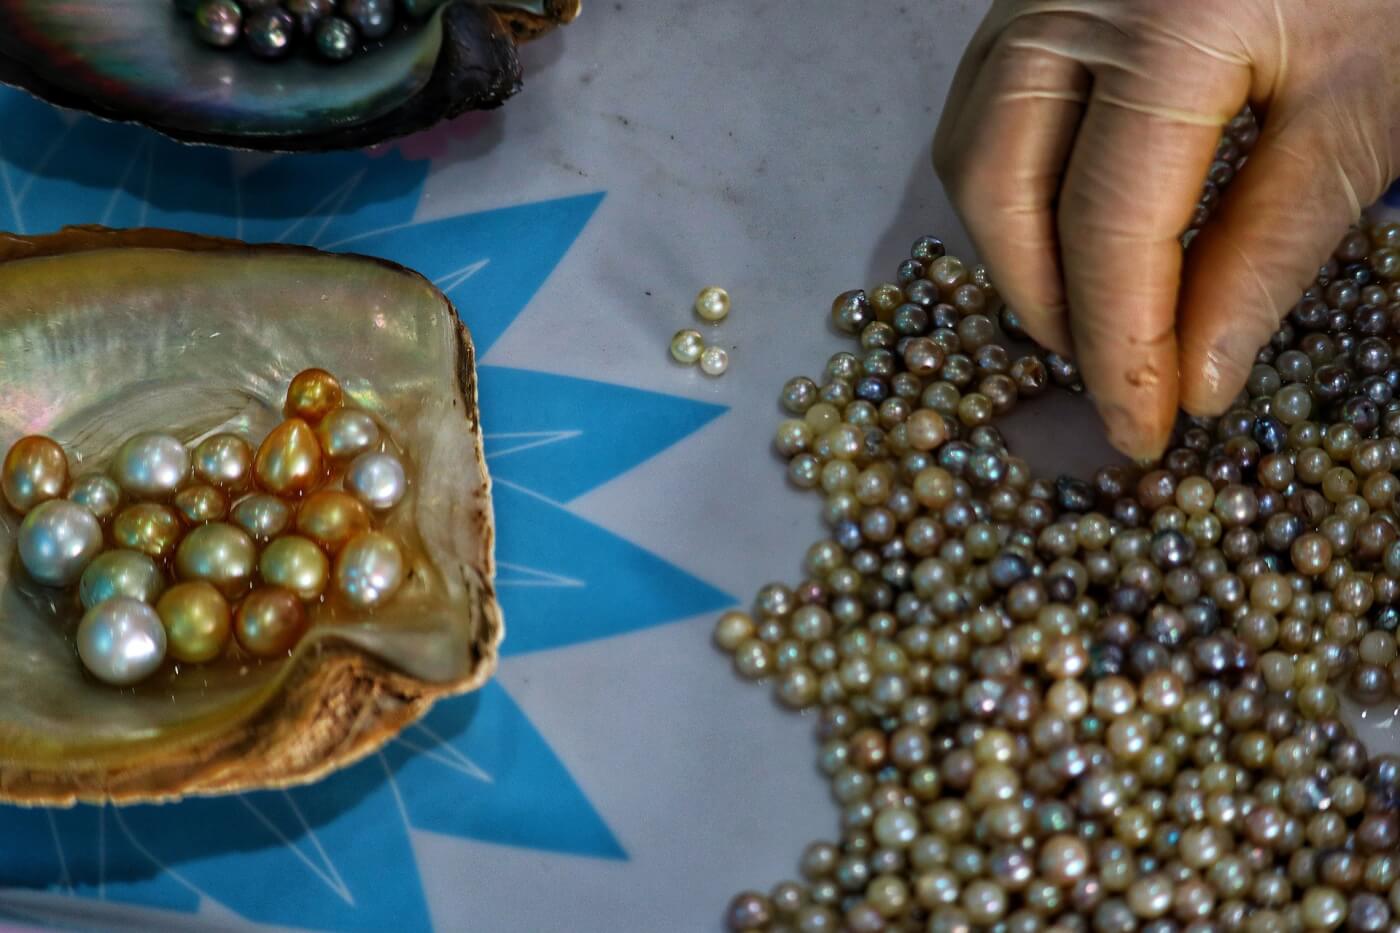 a person's hand sifting through a pile of cultured pearls